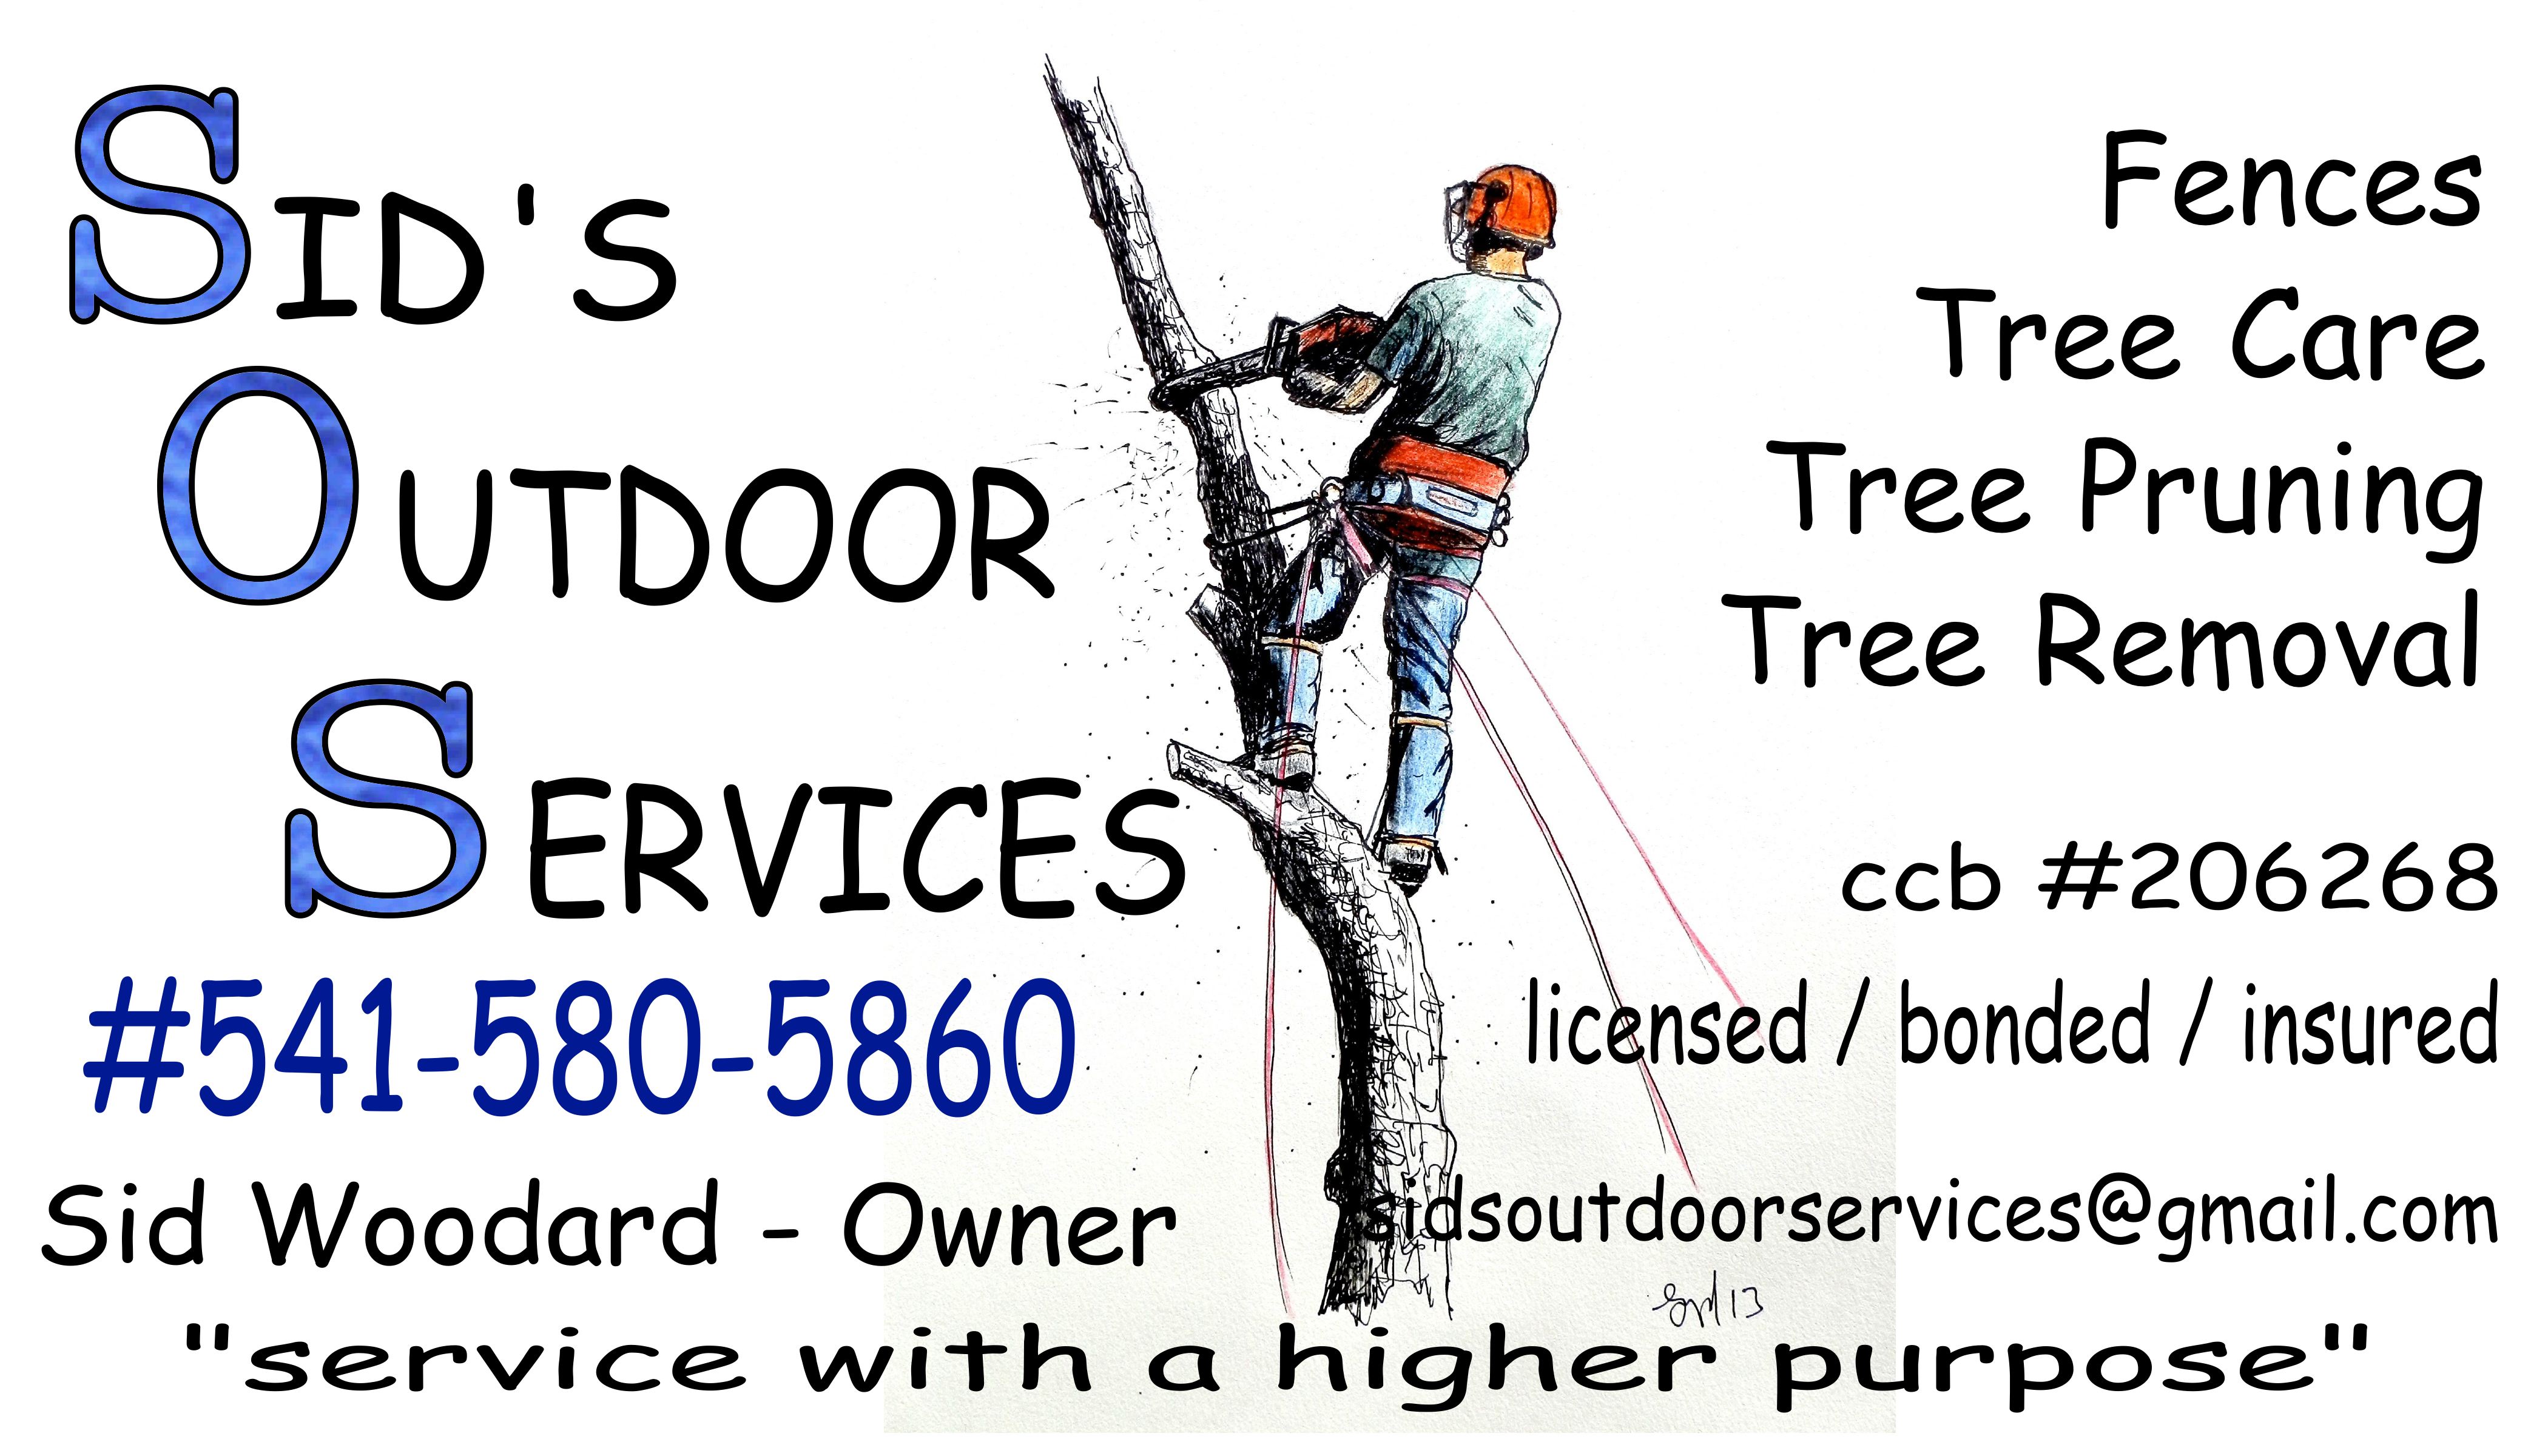 Sids Outdoor Services Logo